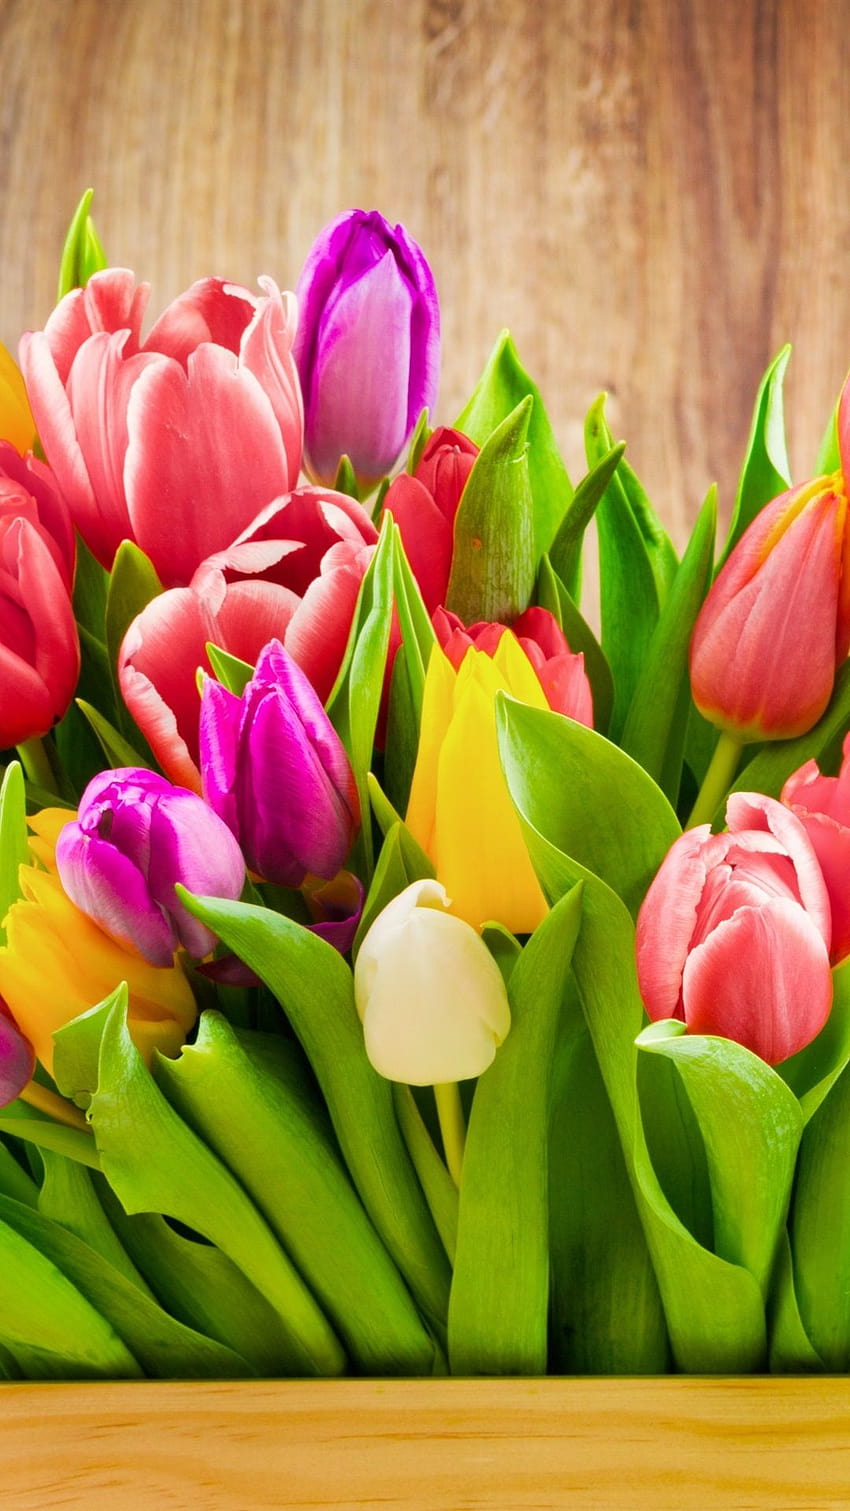 Many colorful tulips flowers, box 1080x1920 iPhone 8/7/6/6S Plus HD phone wallpaper